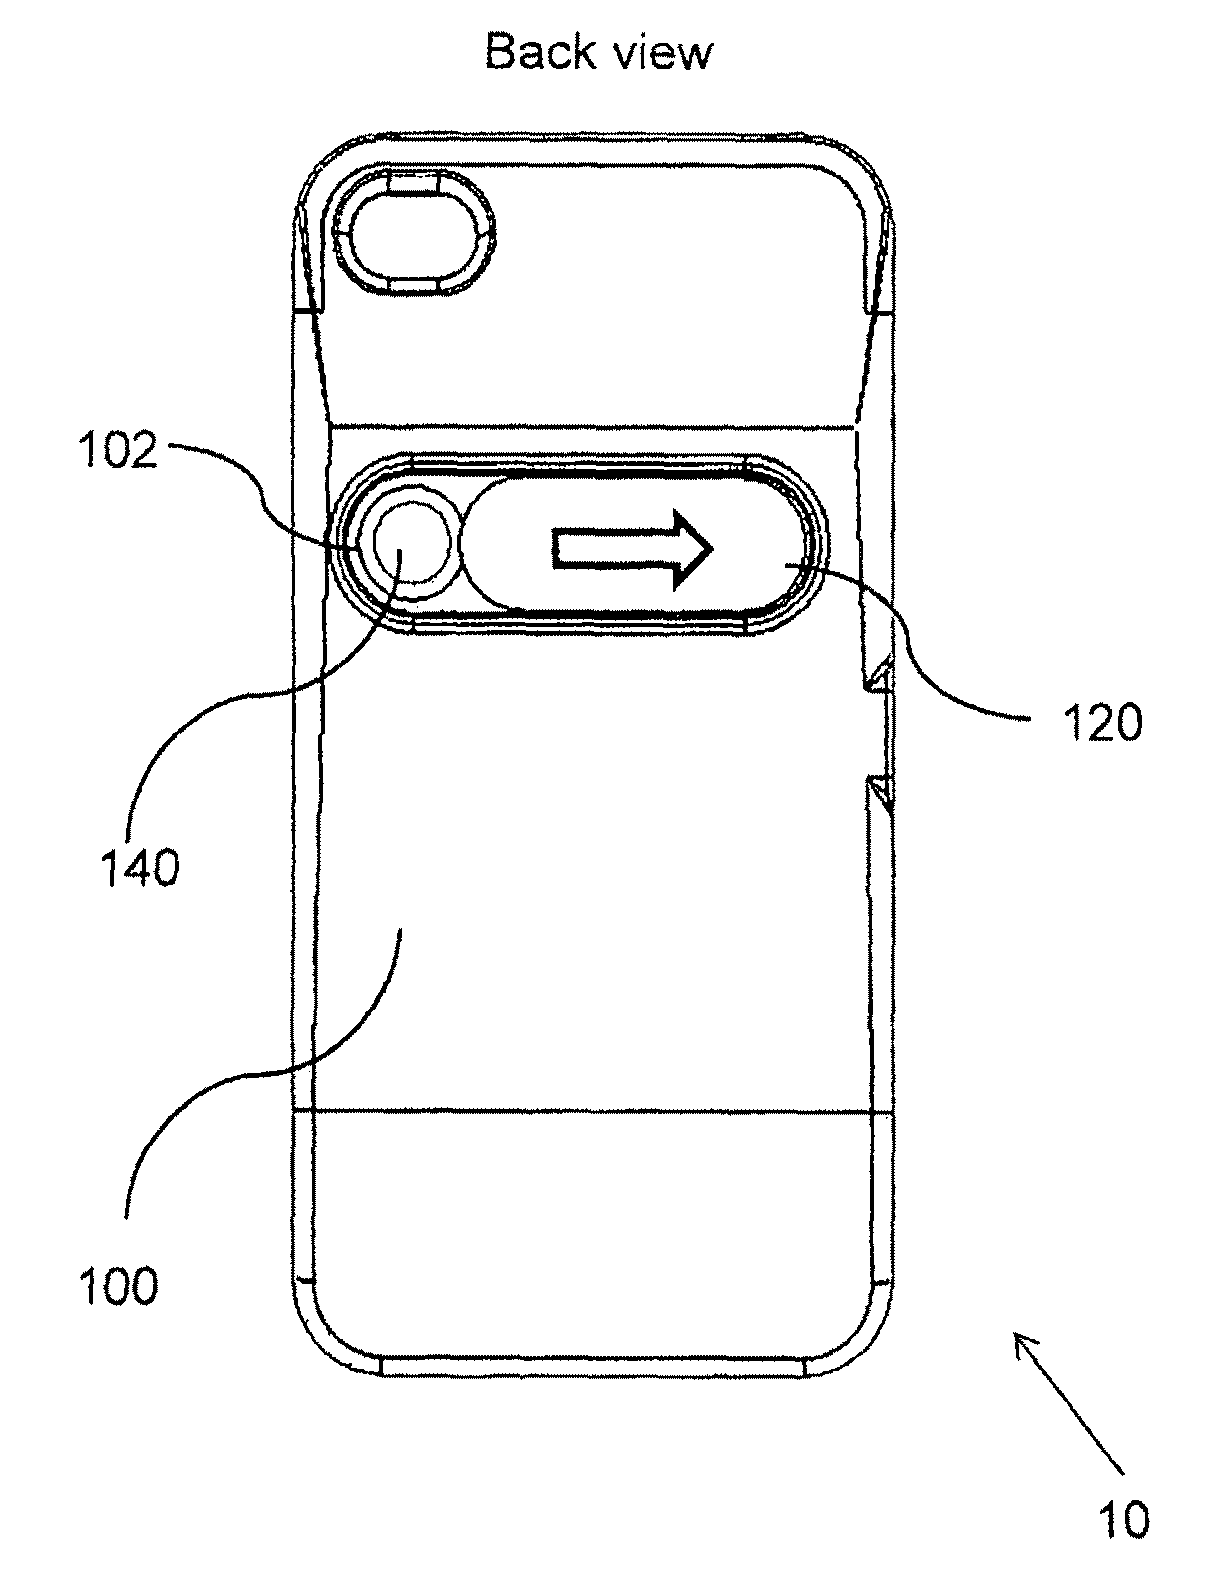 Cover for mobile device with ecological lighter